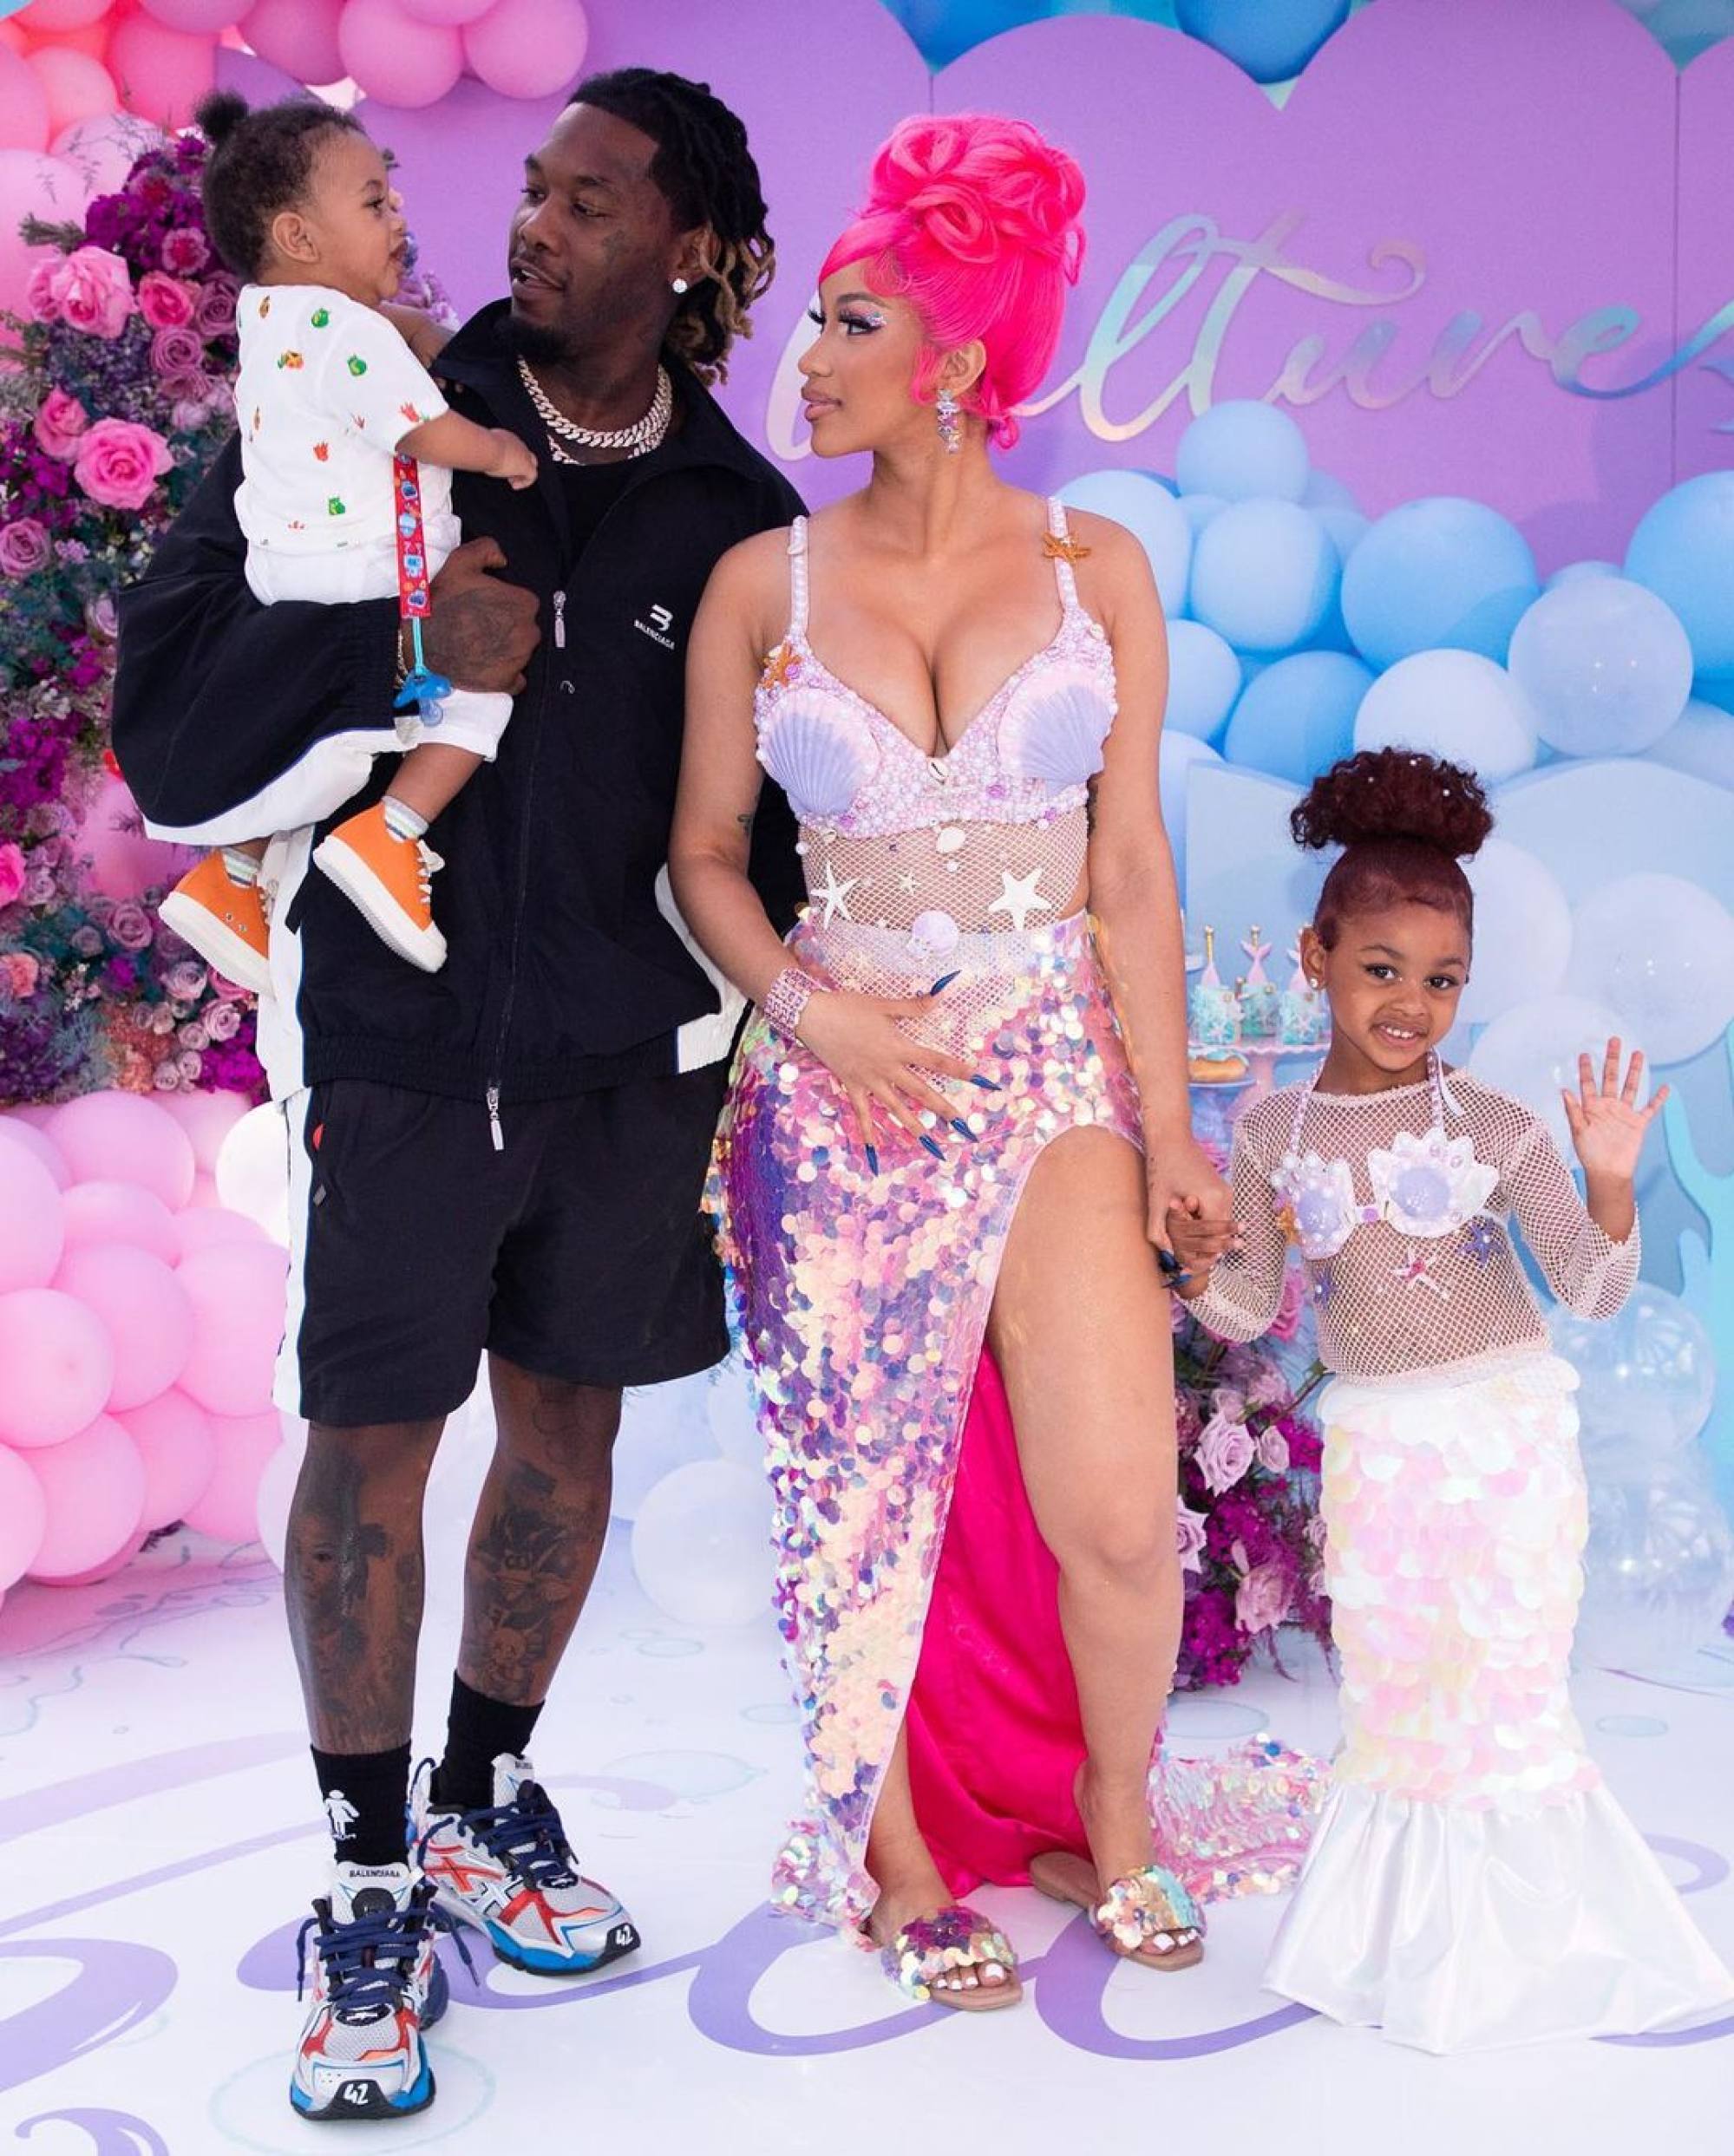 Offset gifts his daughter, Kulture, a Birkin bag for her 2nd birthday